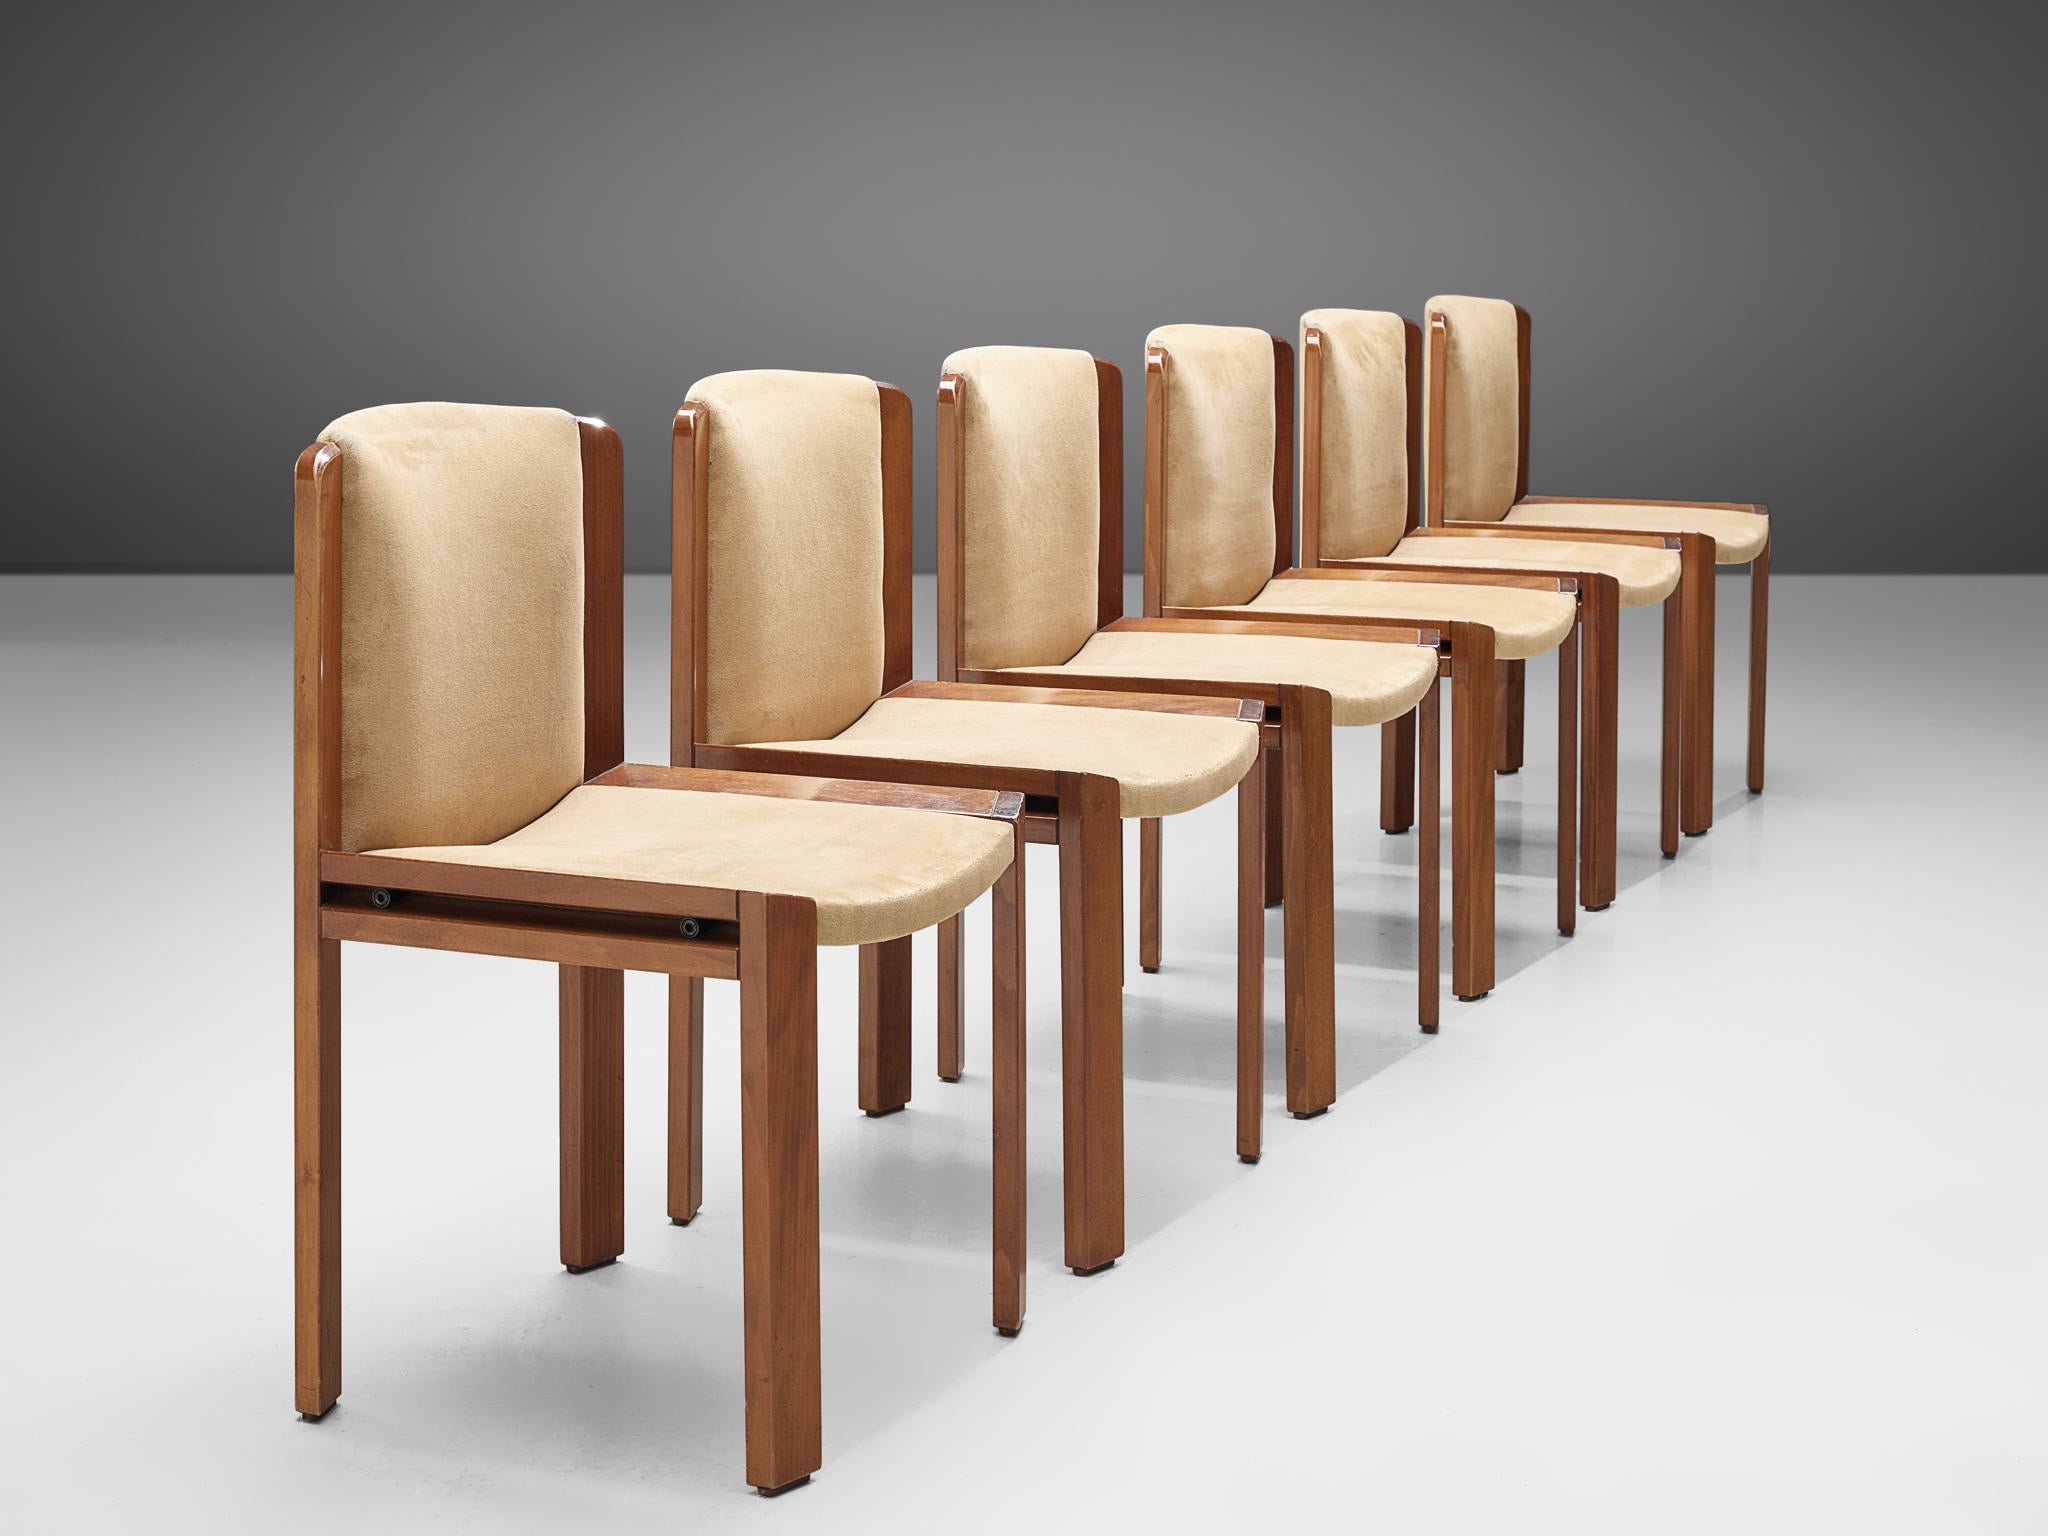 Joe Colombo for Pozzi, set of 6 dining chairs model '300', suede and beech, Italy, 1966.

Functionalist set of dining chairs is designed by Joe Colombo in 1966. His fascination with functionality meant he always focused on the user, which lead him